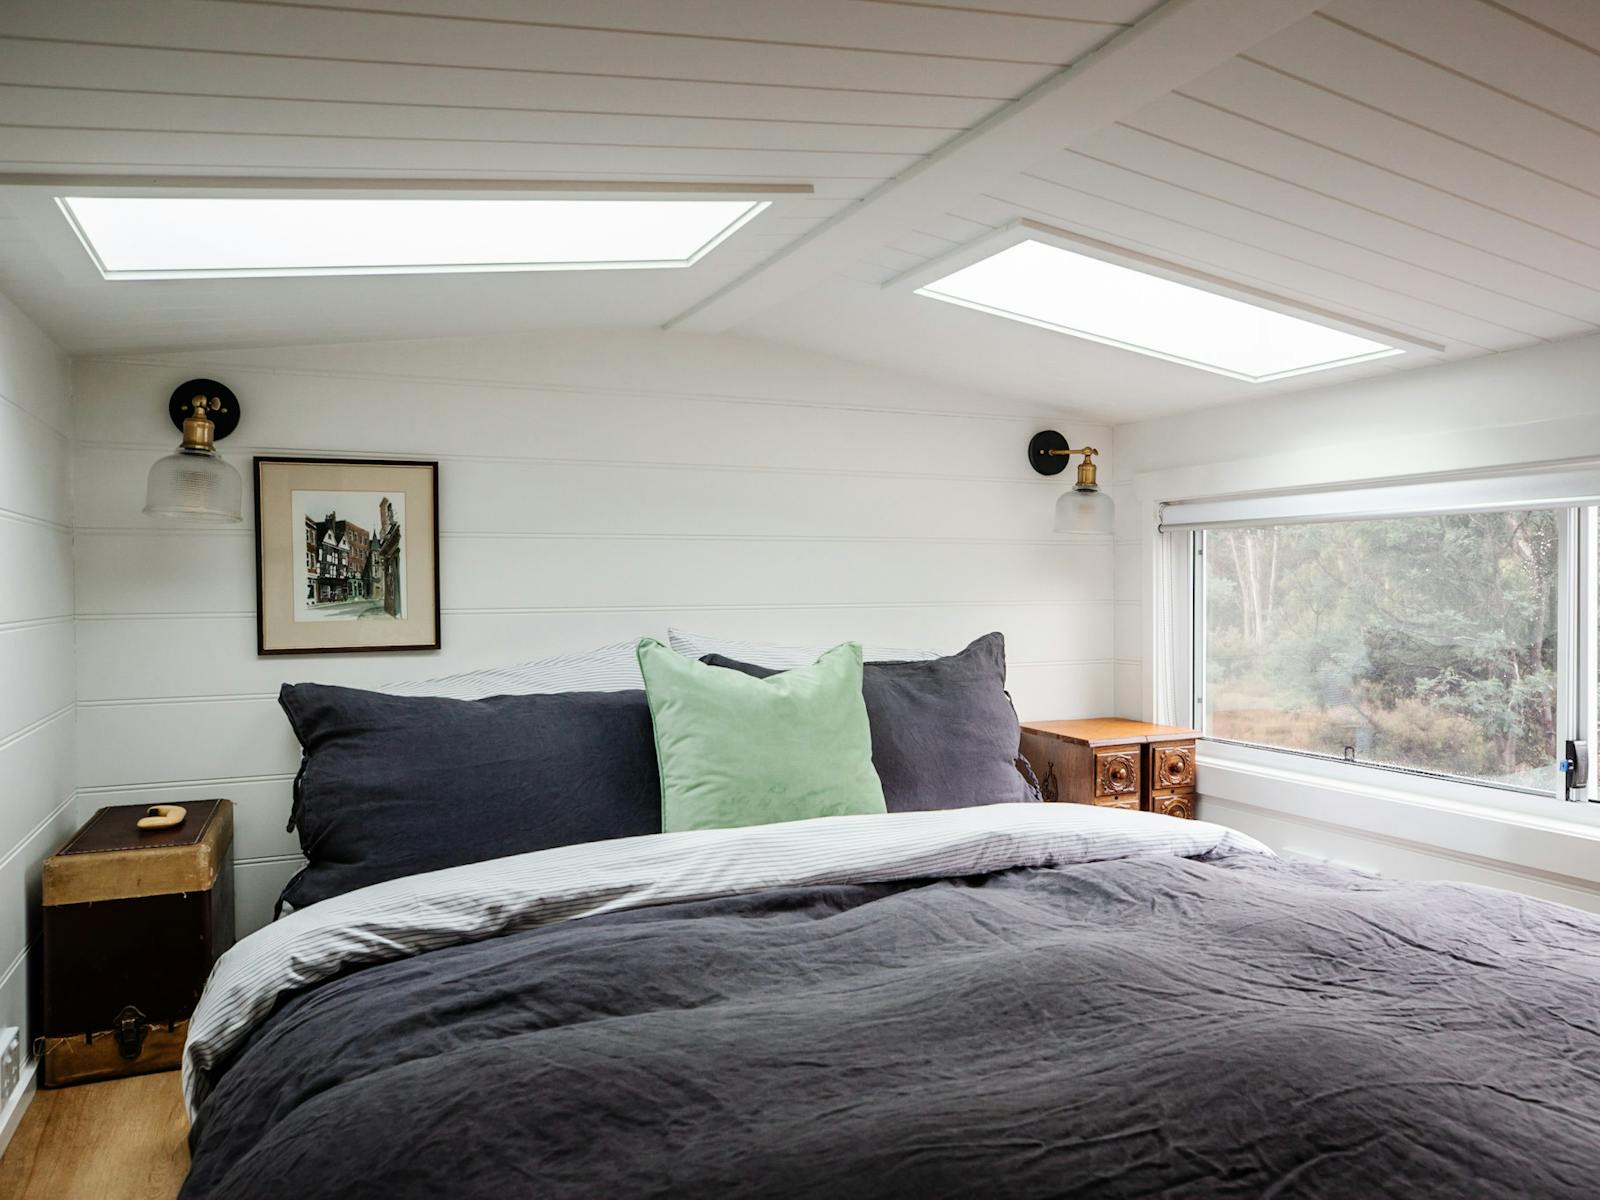 Luxury bedding and skylights in our comfortable loft